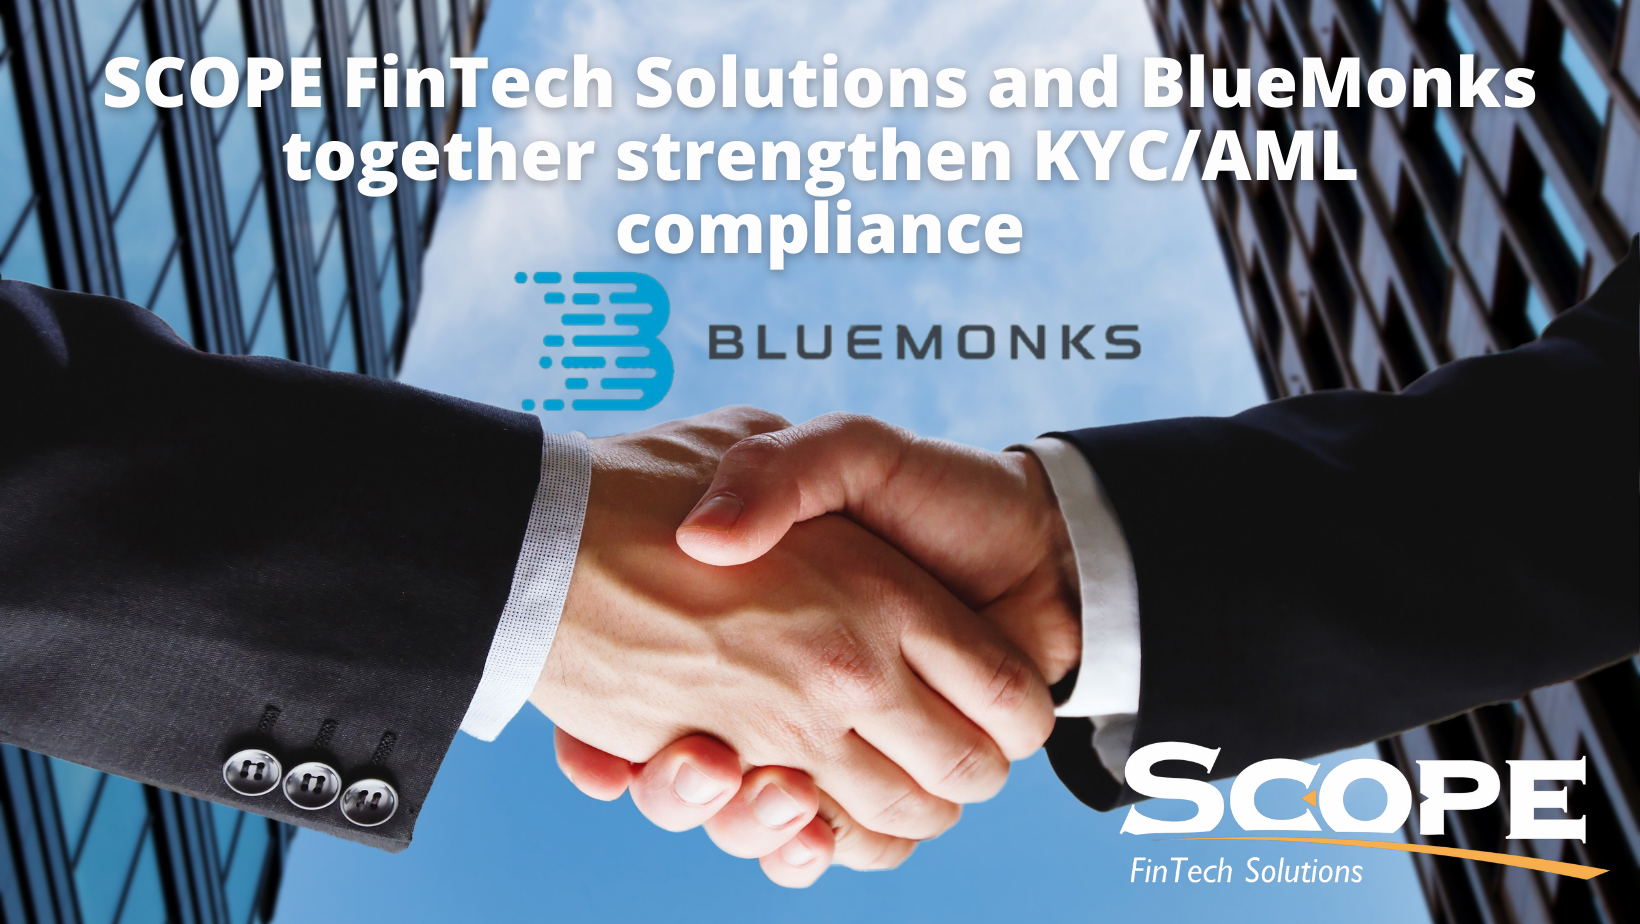 Strategic partnership SCOPE FinTech Solutions and BlueMonks